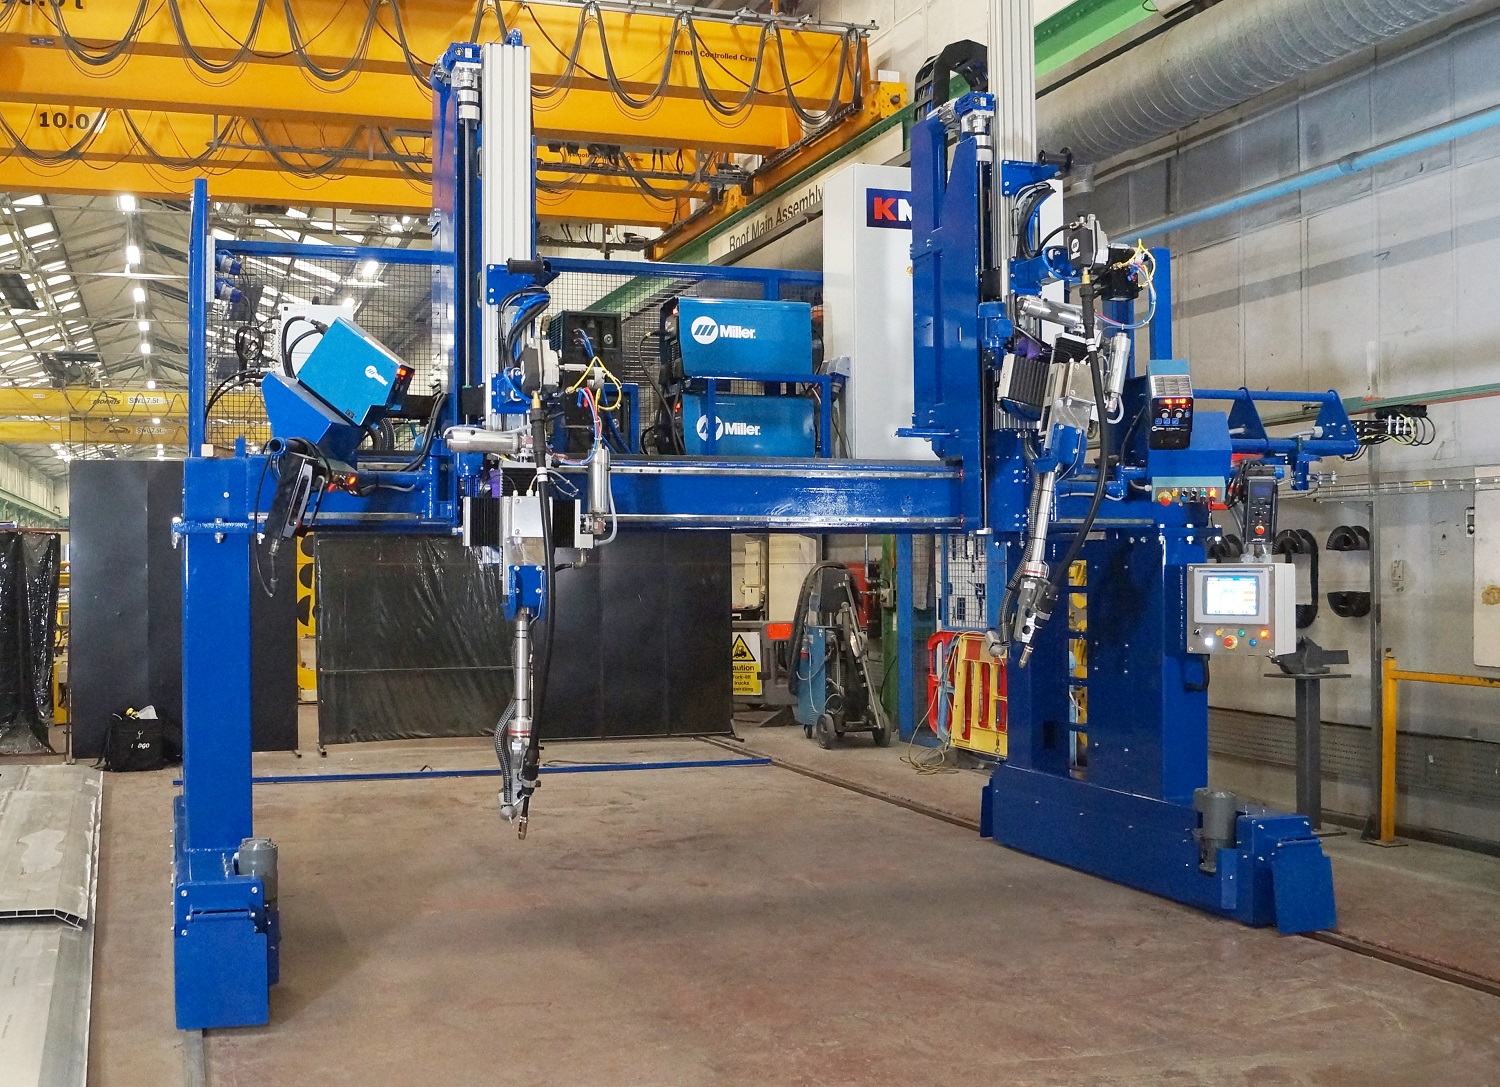 KM Tools Ltd has demonstrated its machine building capabilities by supplying a new welding gantry to Bombardier, the UK’s leading rail engineering and manufacturing company.